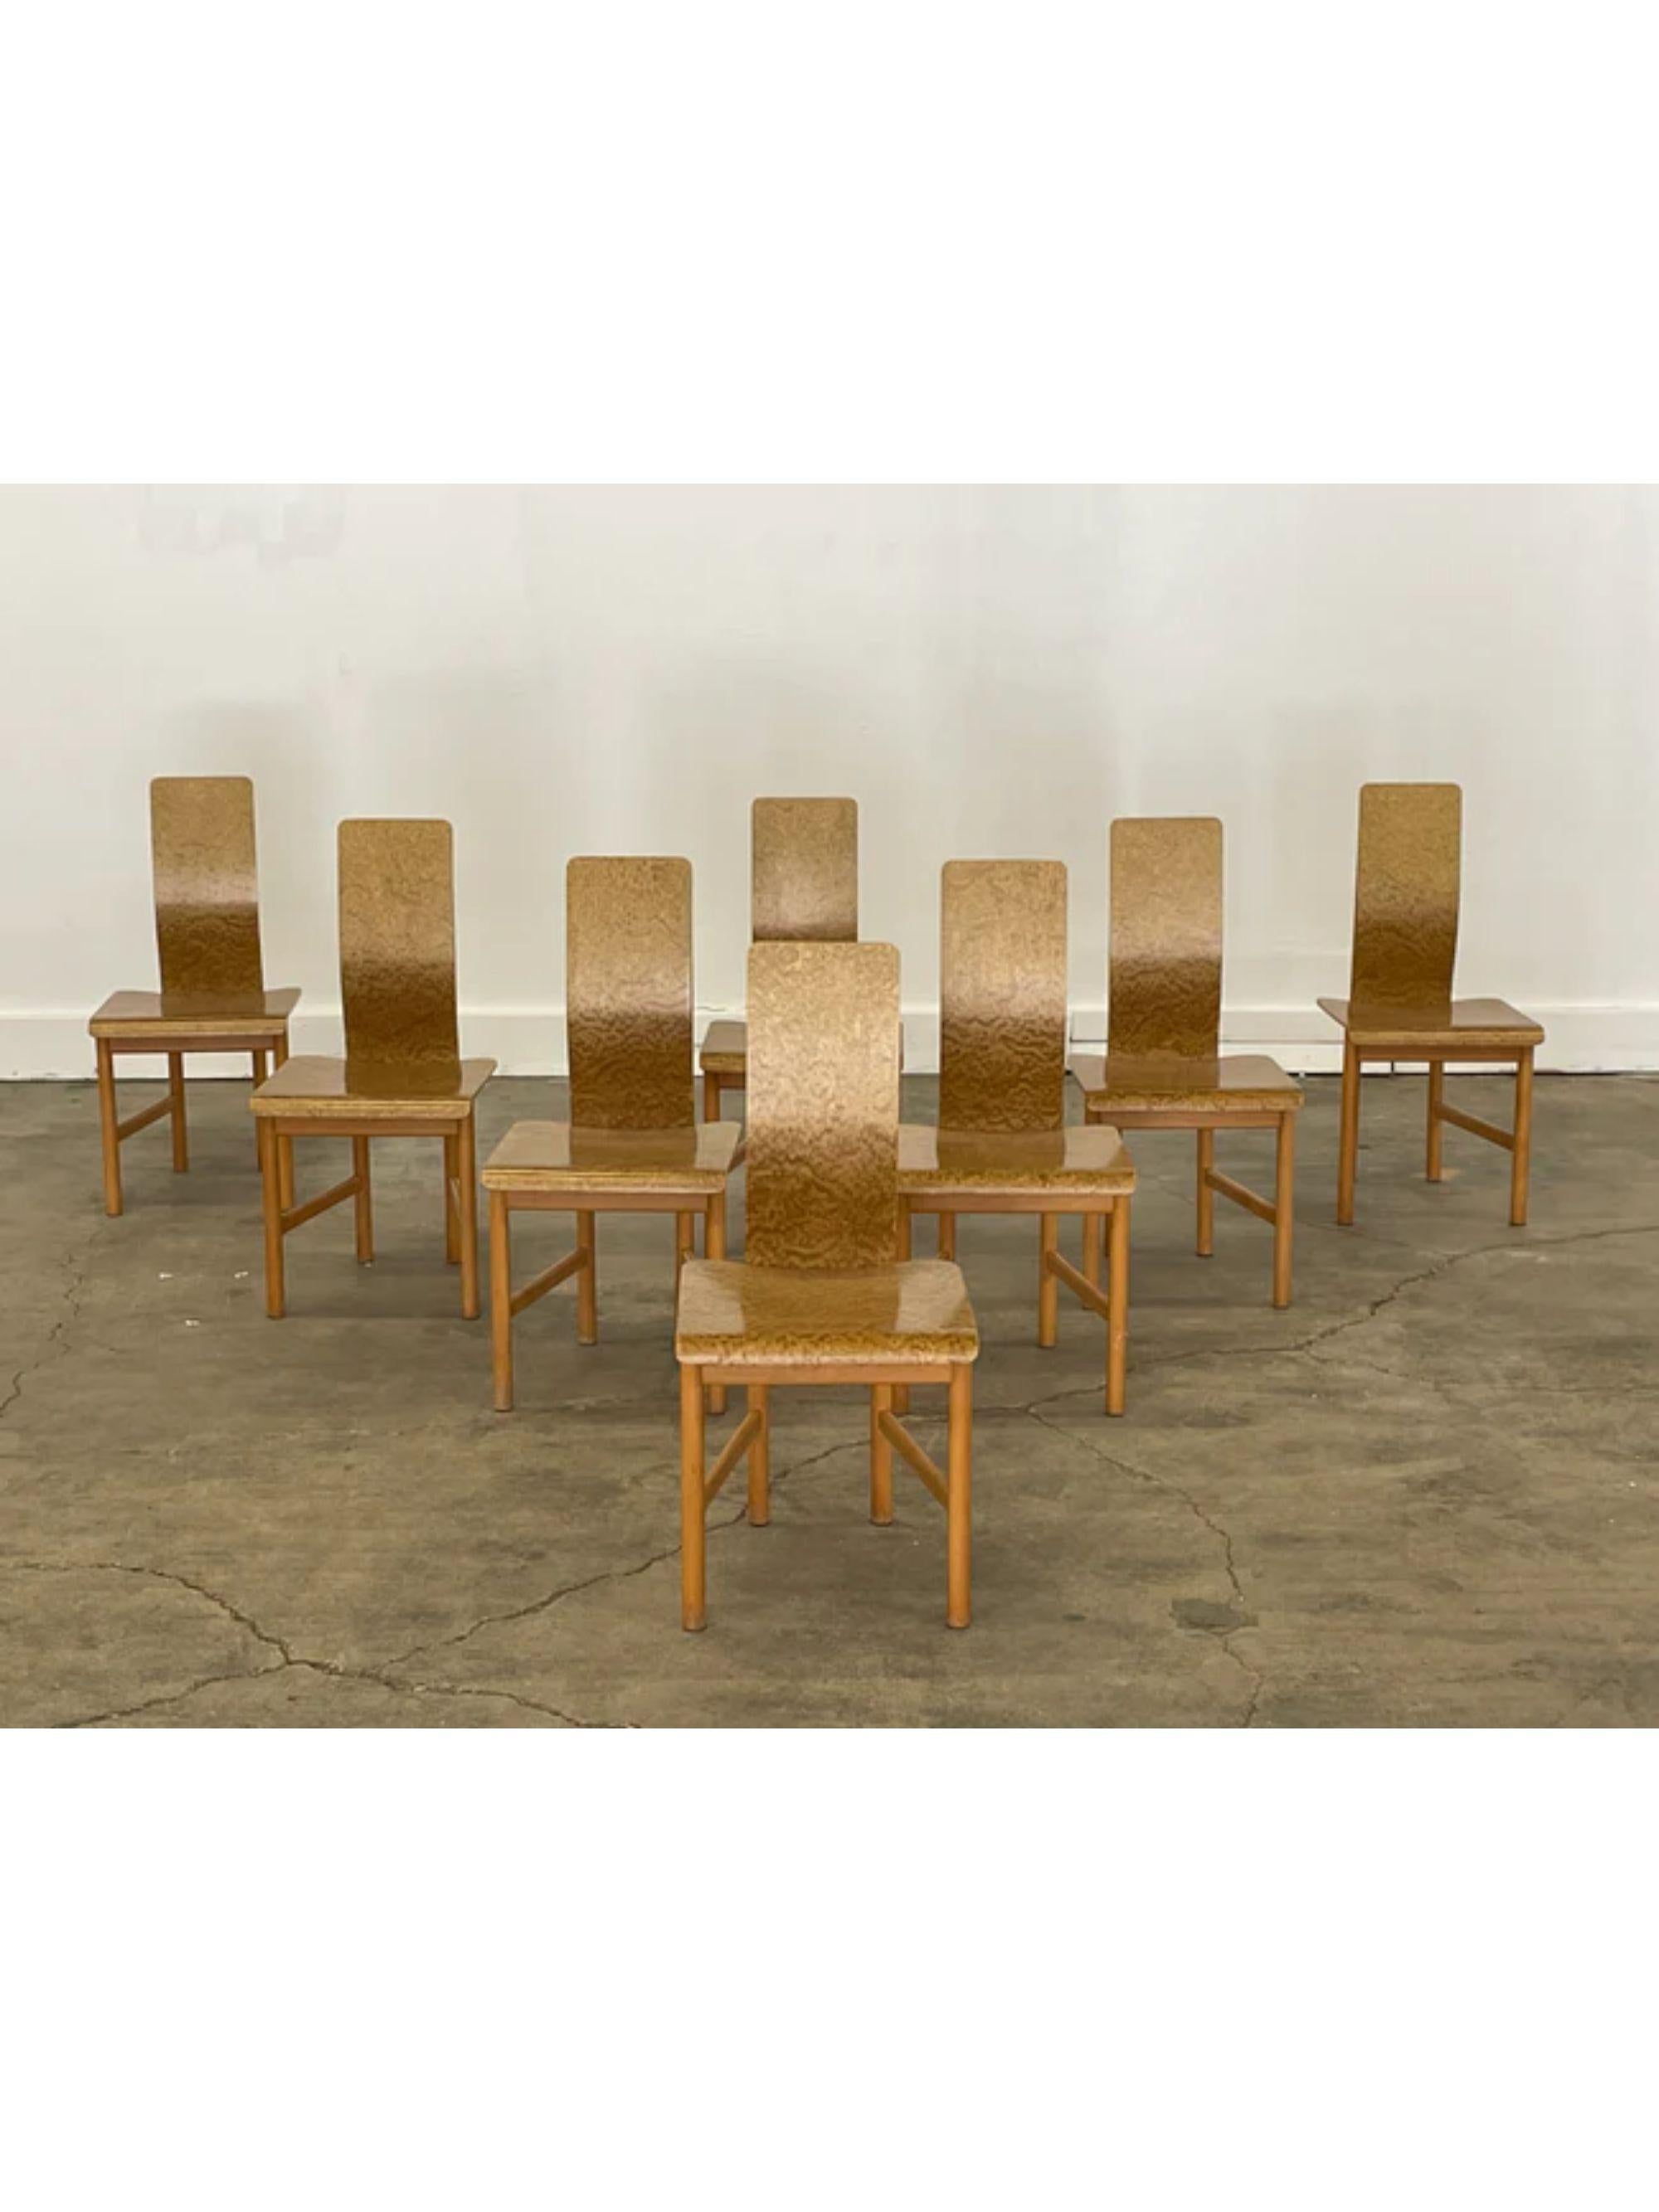 Enzo Mari rare set of eight “Vela” burlwood dining chairs for Driade, Italy circa 1977

Long out of production and quite rare especially in this quantity.

Additional Information:
Materials: Moled plywood in burl veneer, beech wood
Dimensions: